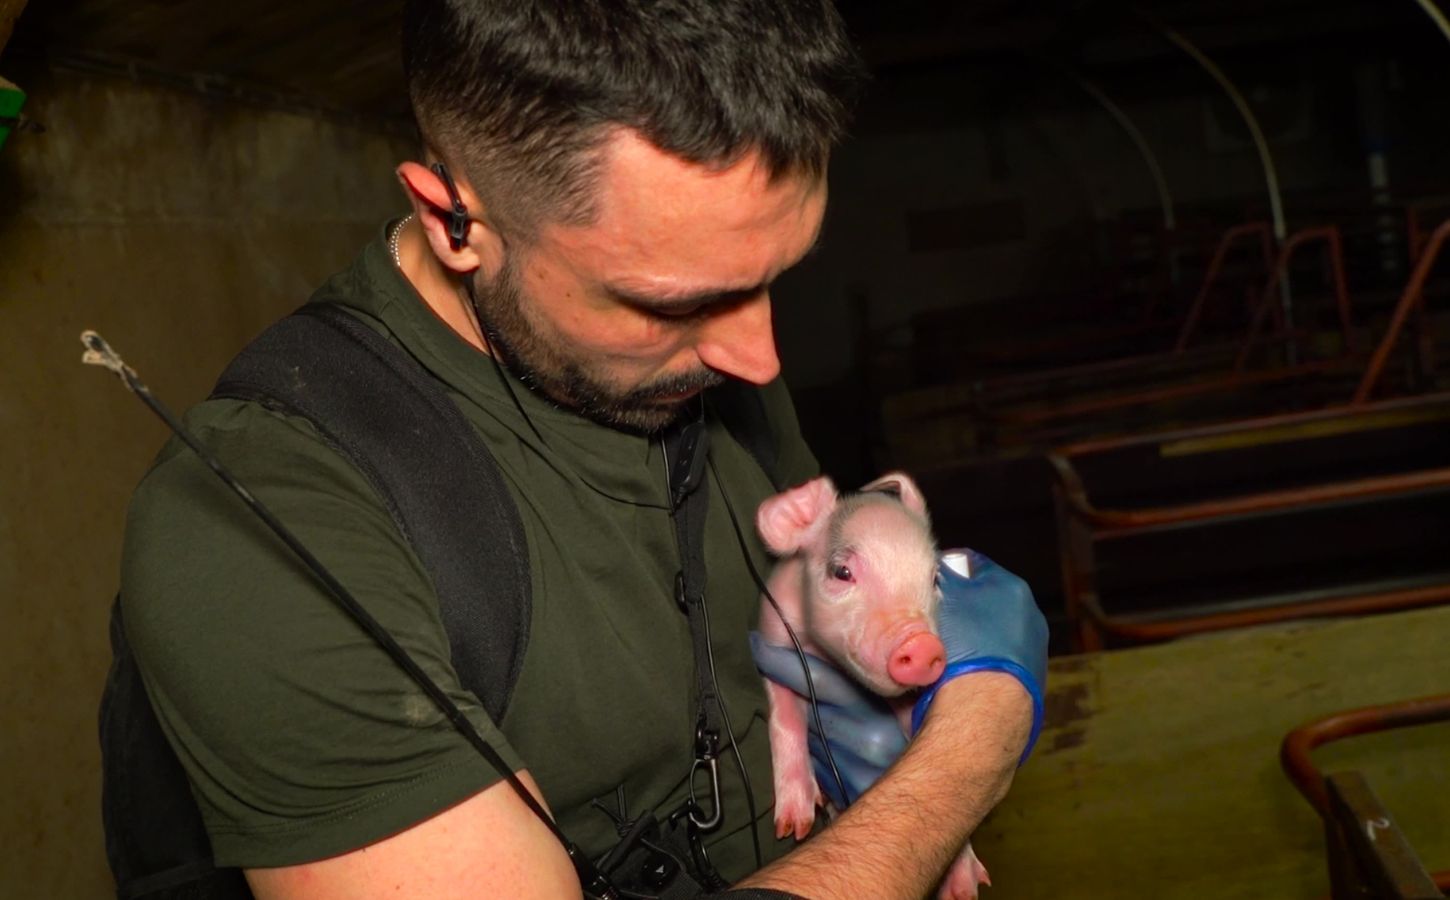 Joey Carbstrong holding a piglet in a UK factory farm, a still from his new film Pignorant